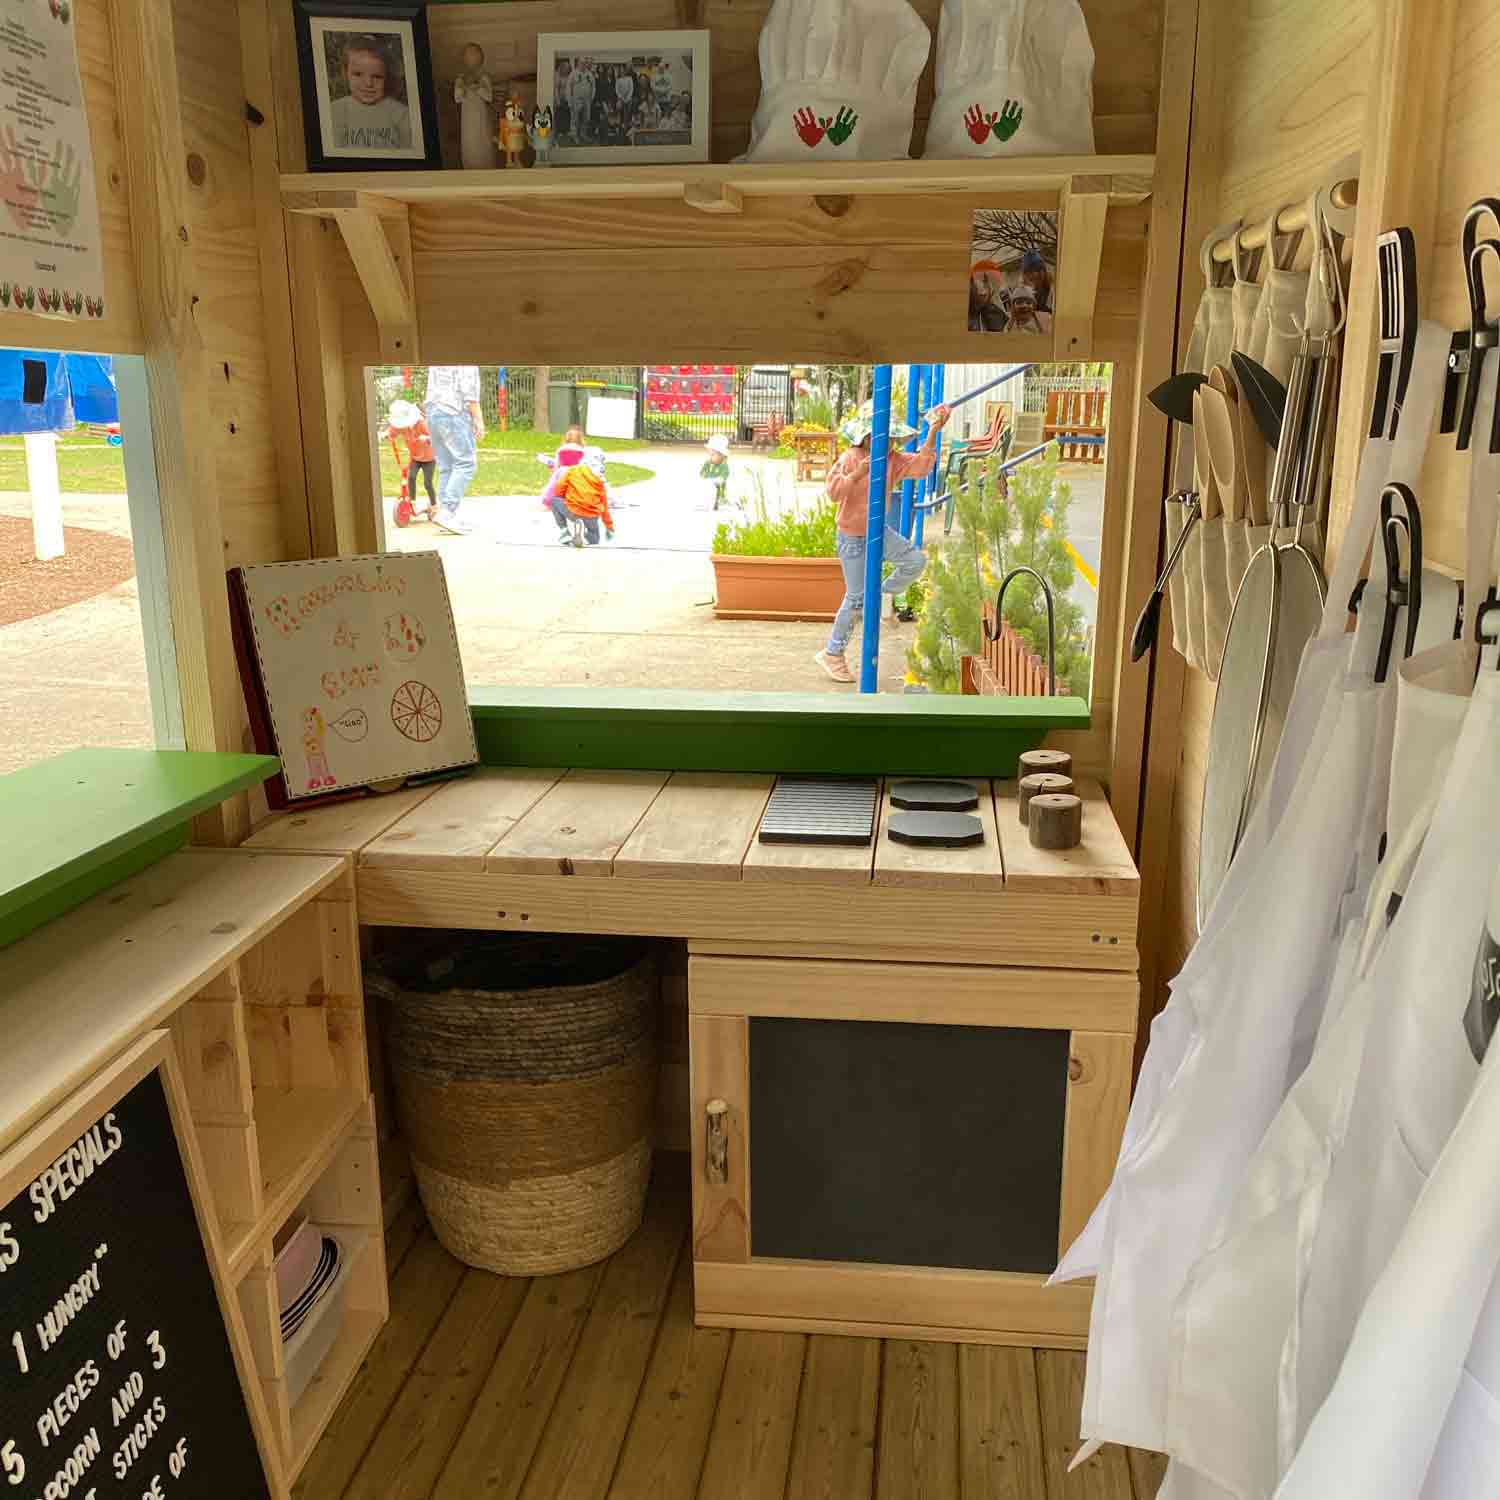 A cubby house interior with a internal mud kitchen